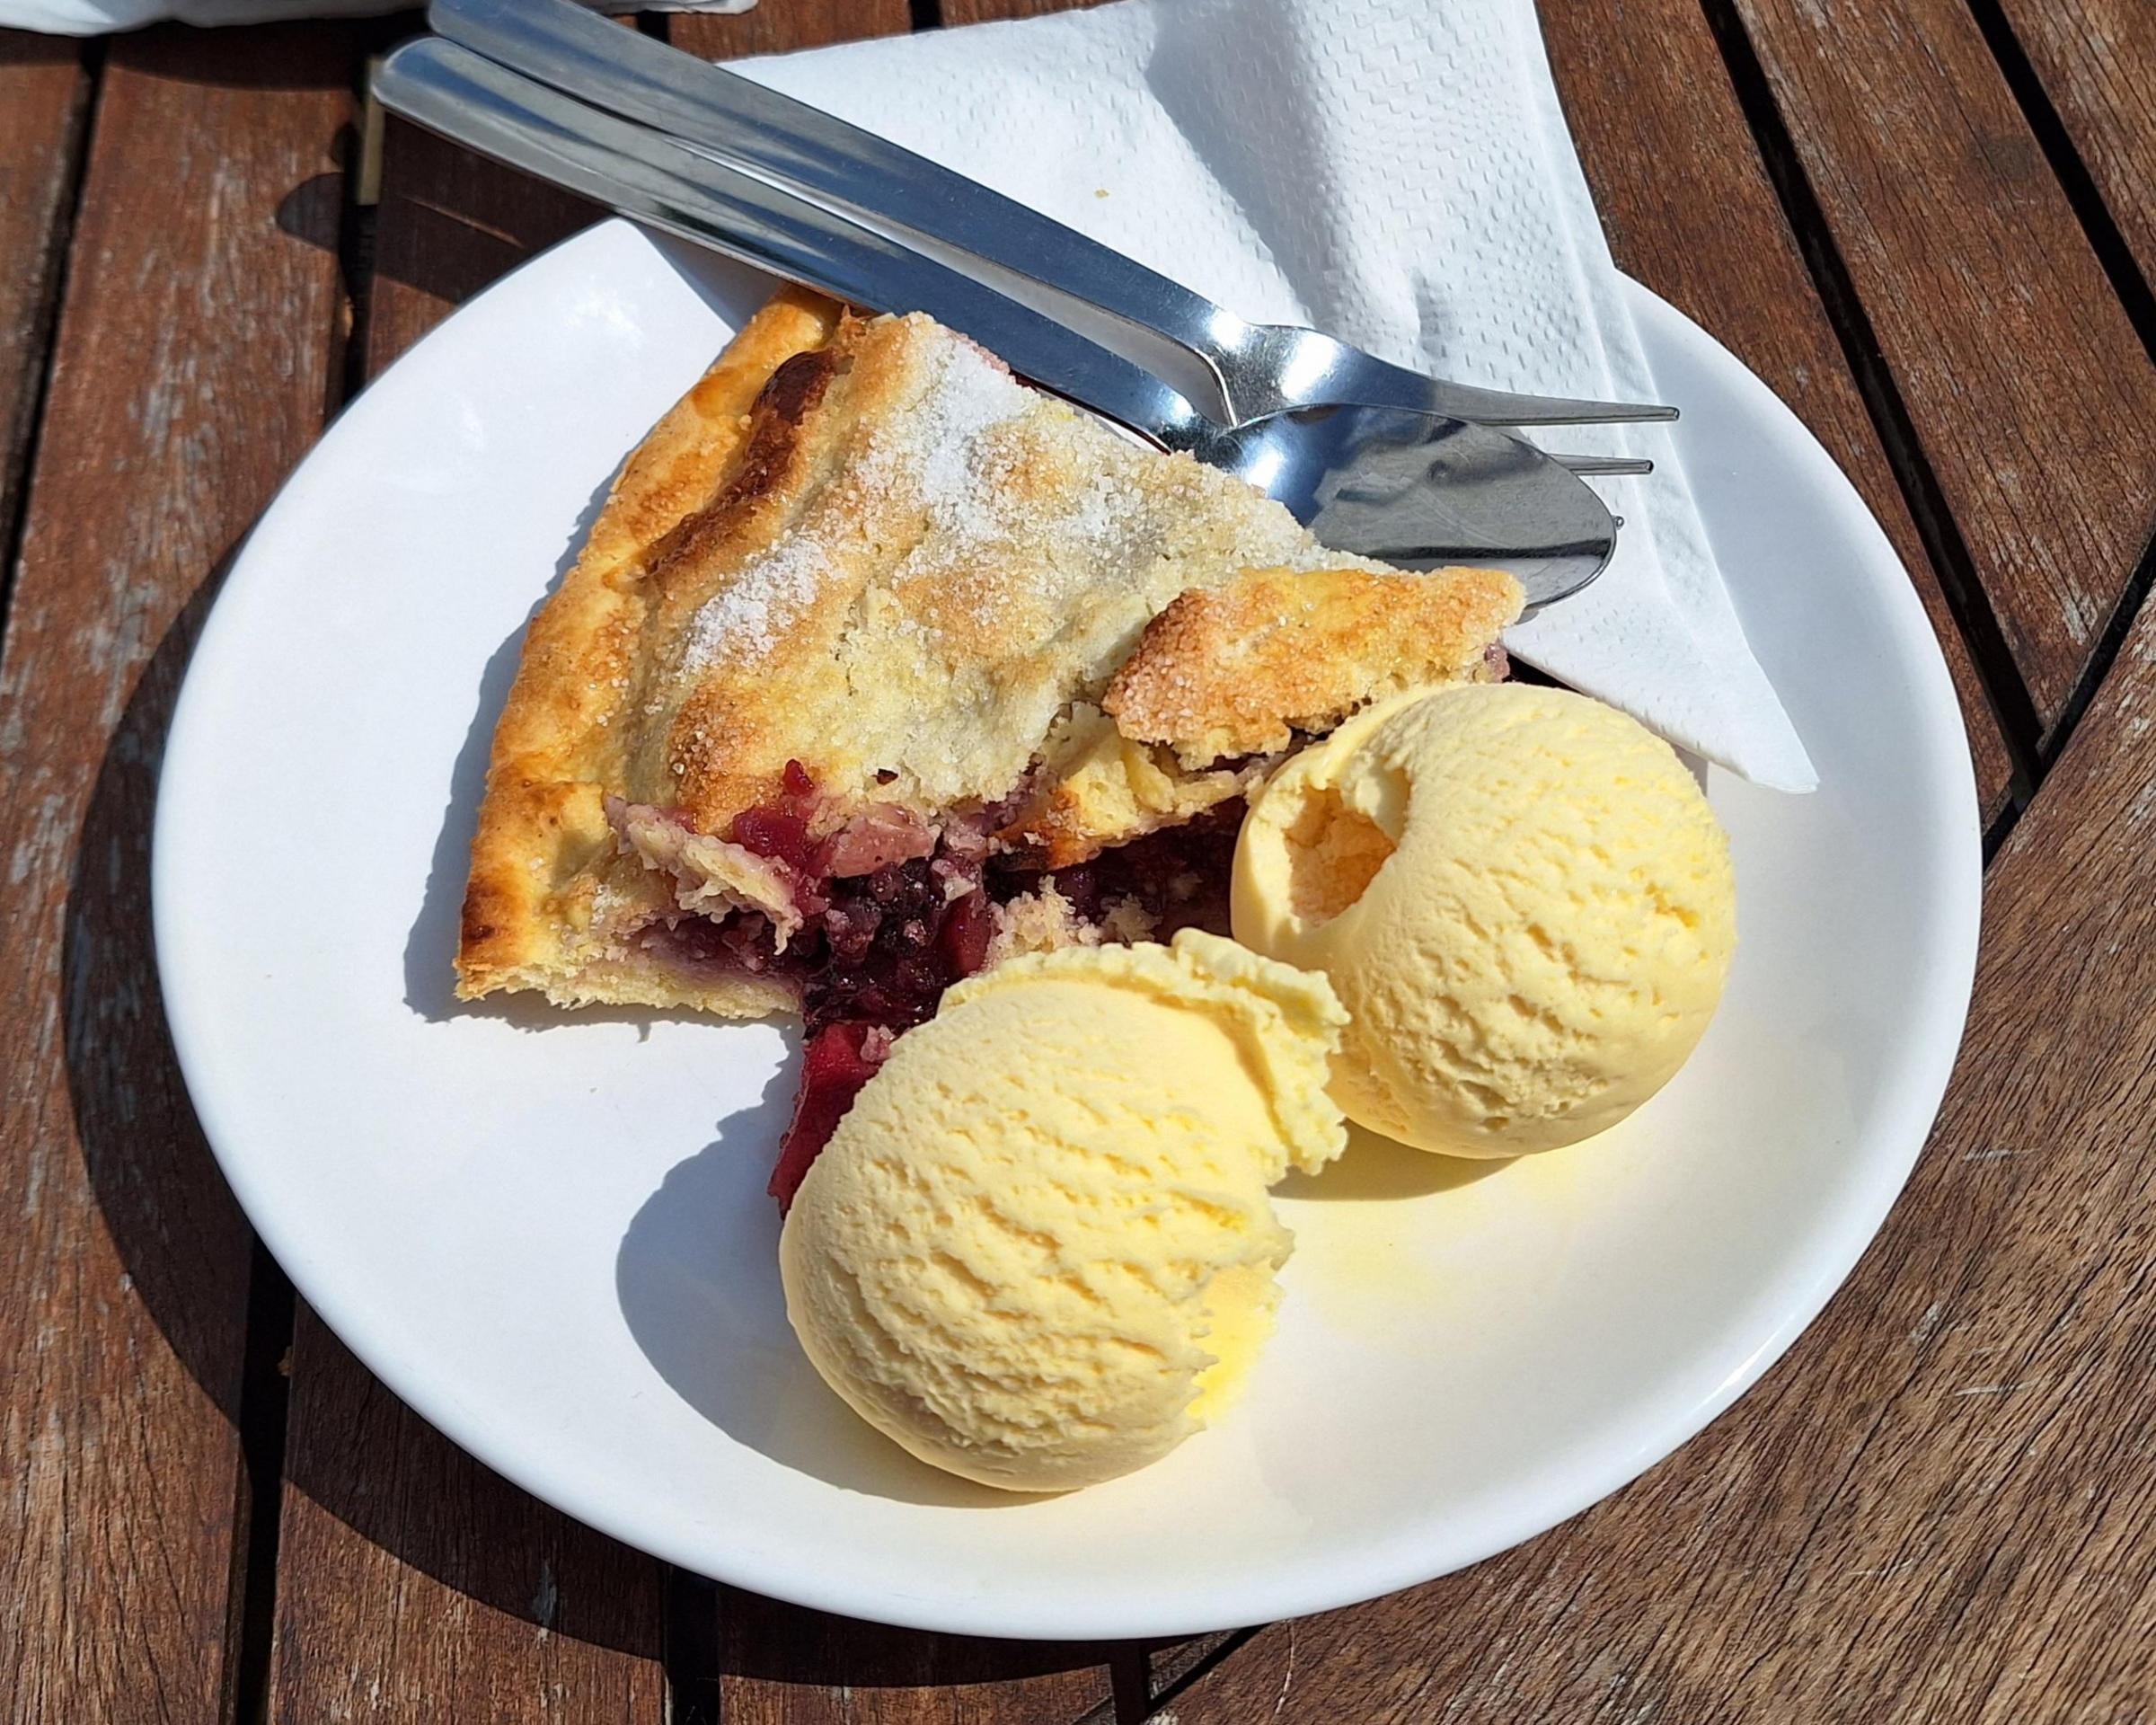 Bramble and apple pie with ice cream - the pastry melted in the mouth